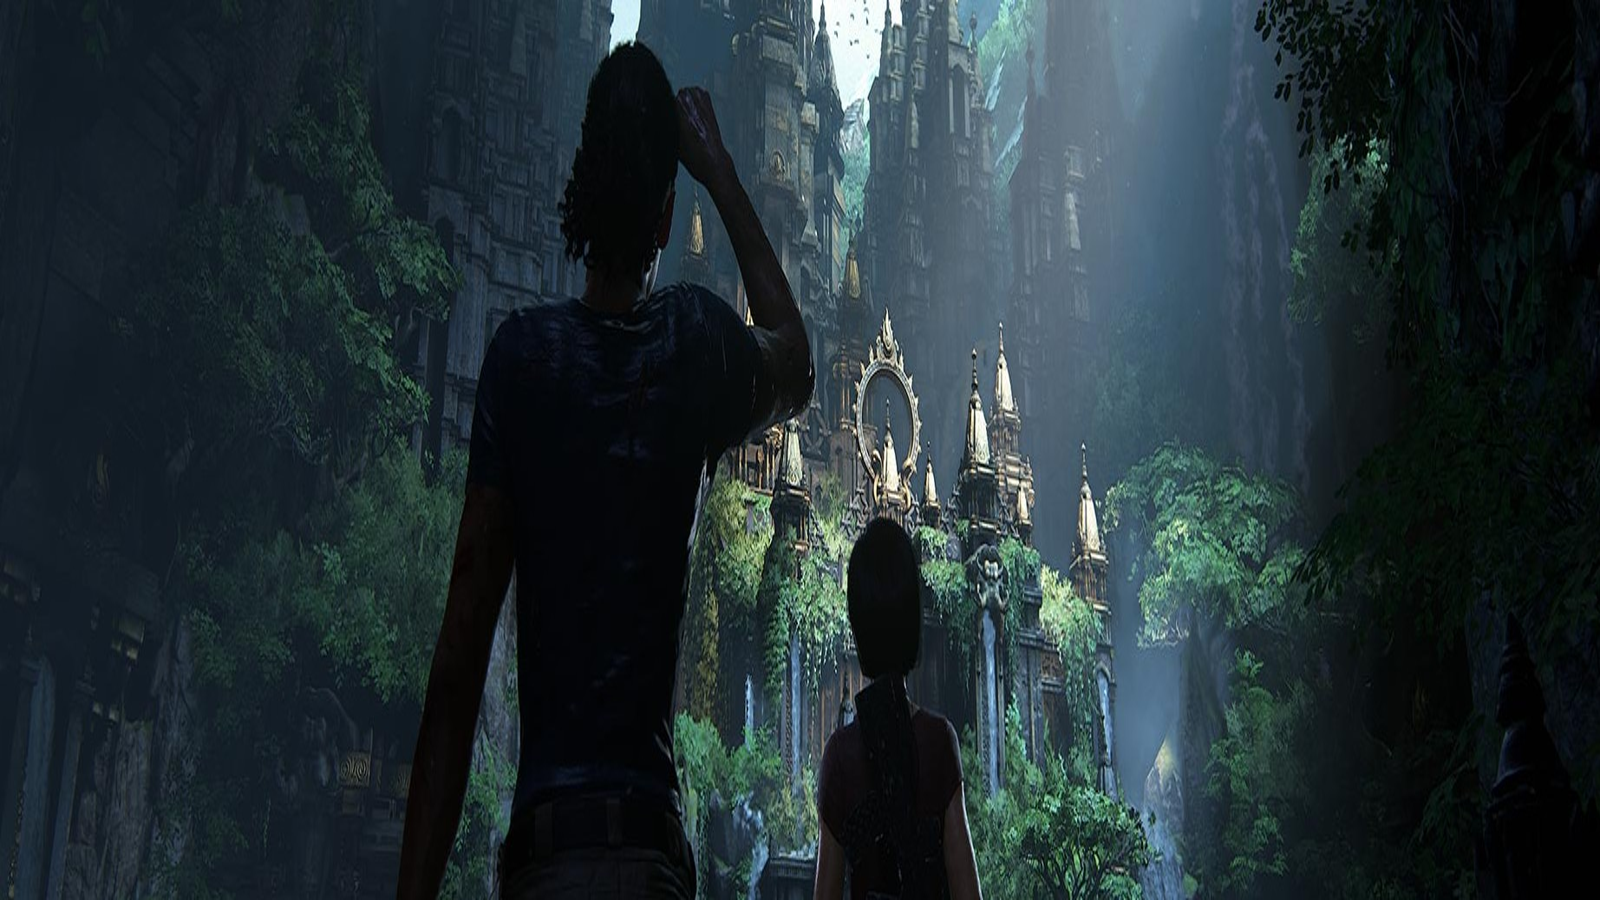 Uncharted: The Lost Legacy: Every Trophy Available